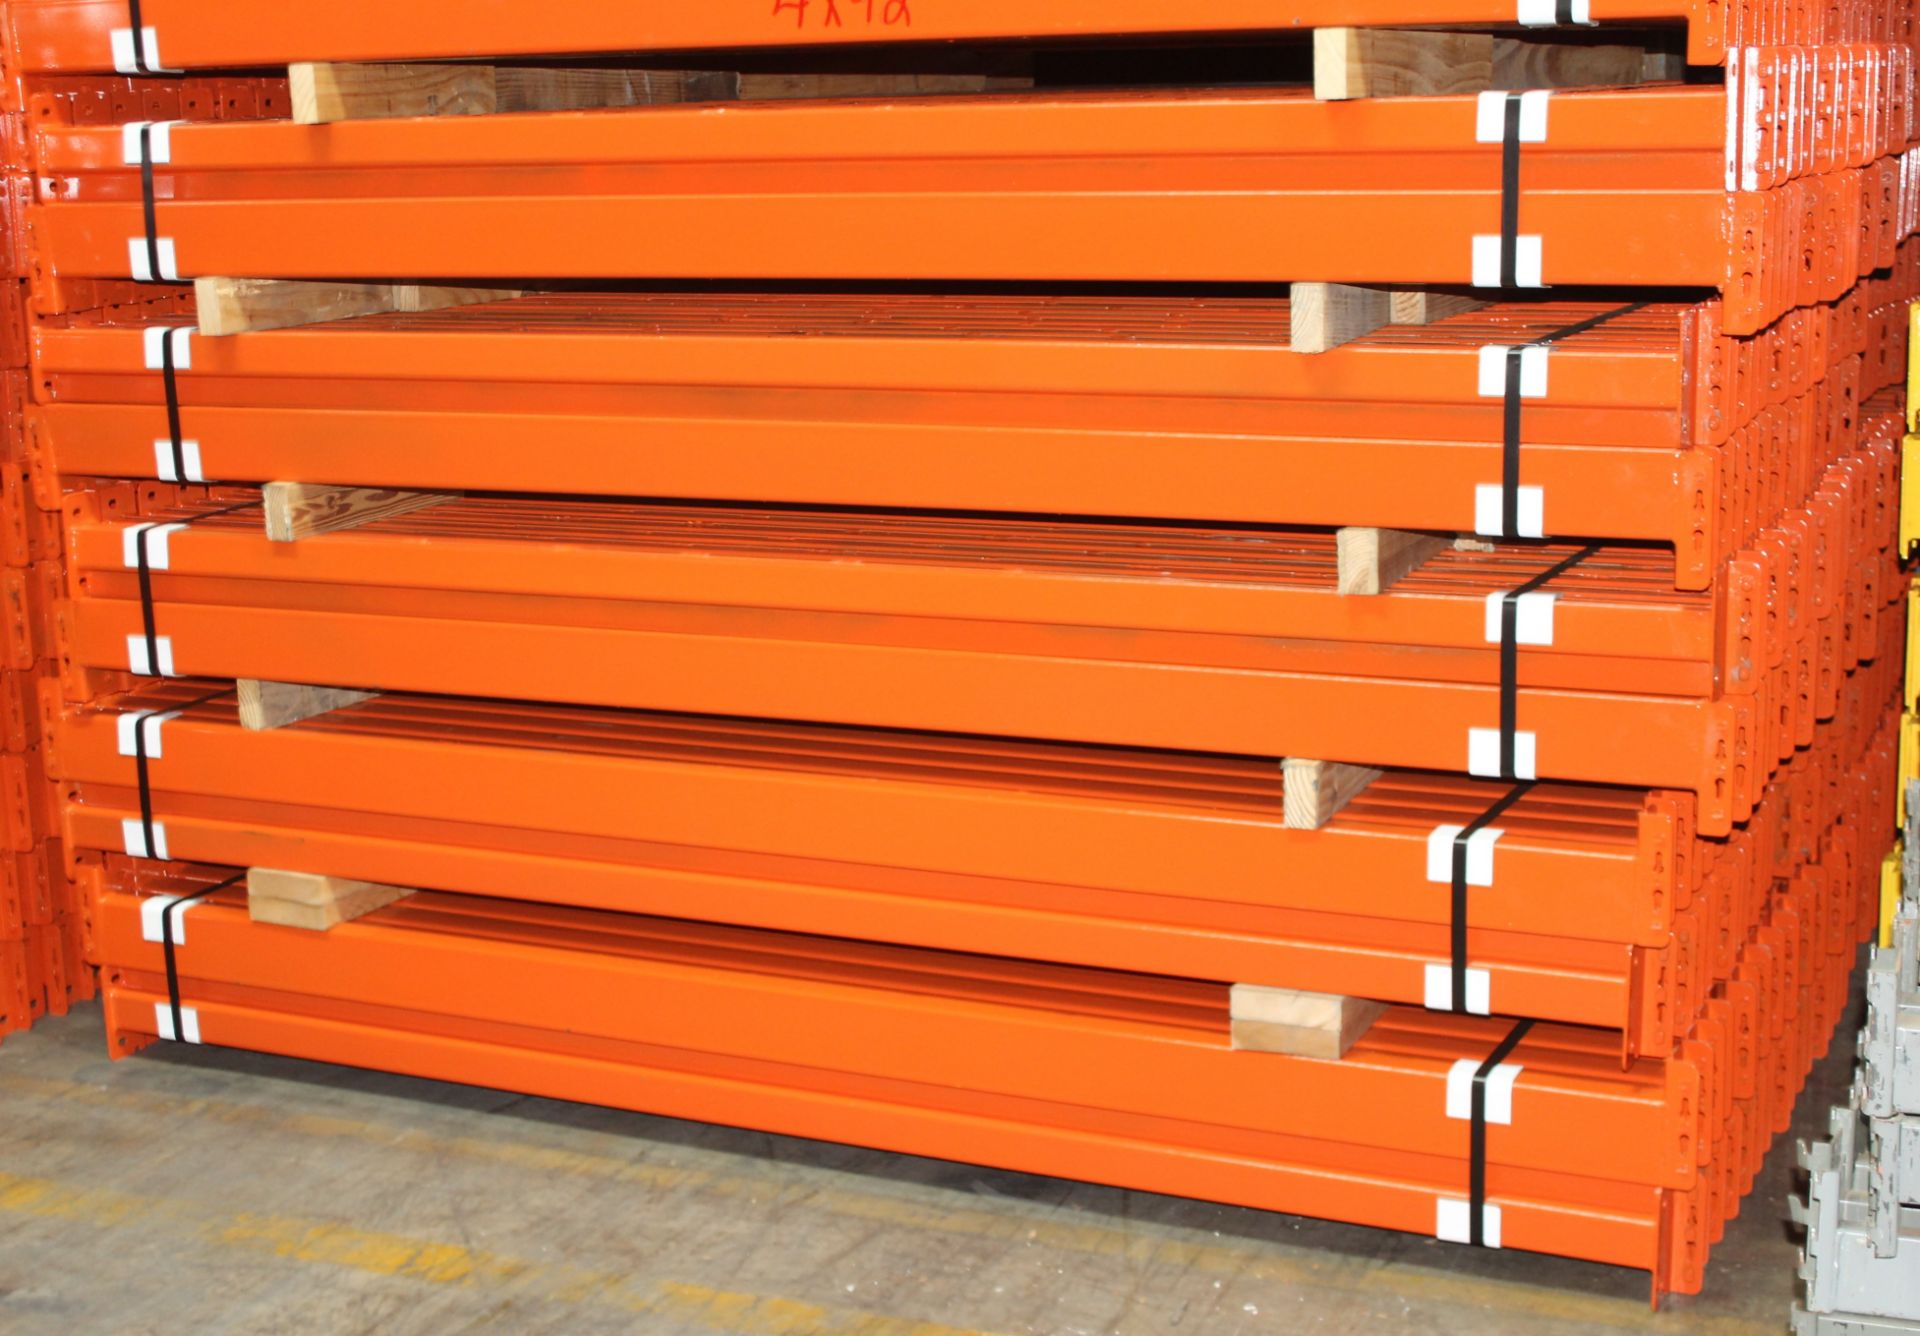 LIKE NEW TEAR DROP STYLE PALLET RACK WITH WIRE DECKING. SIZE:  144"H X 96"L X 42"D, FULL TRUCK LOAD - Image 5 of 6